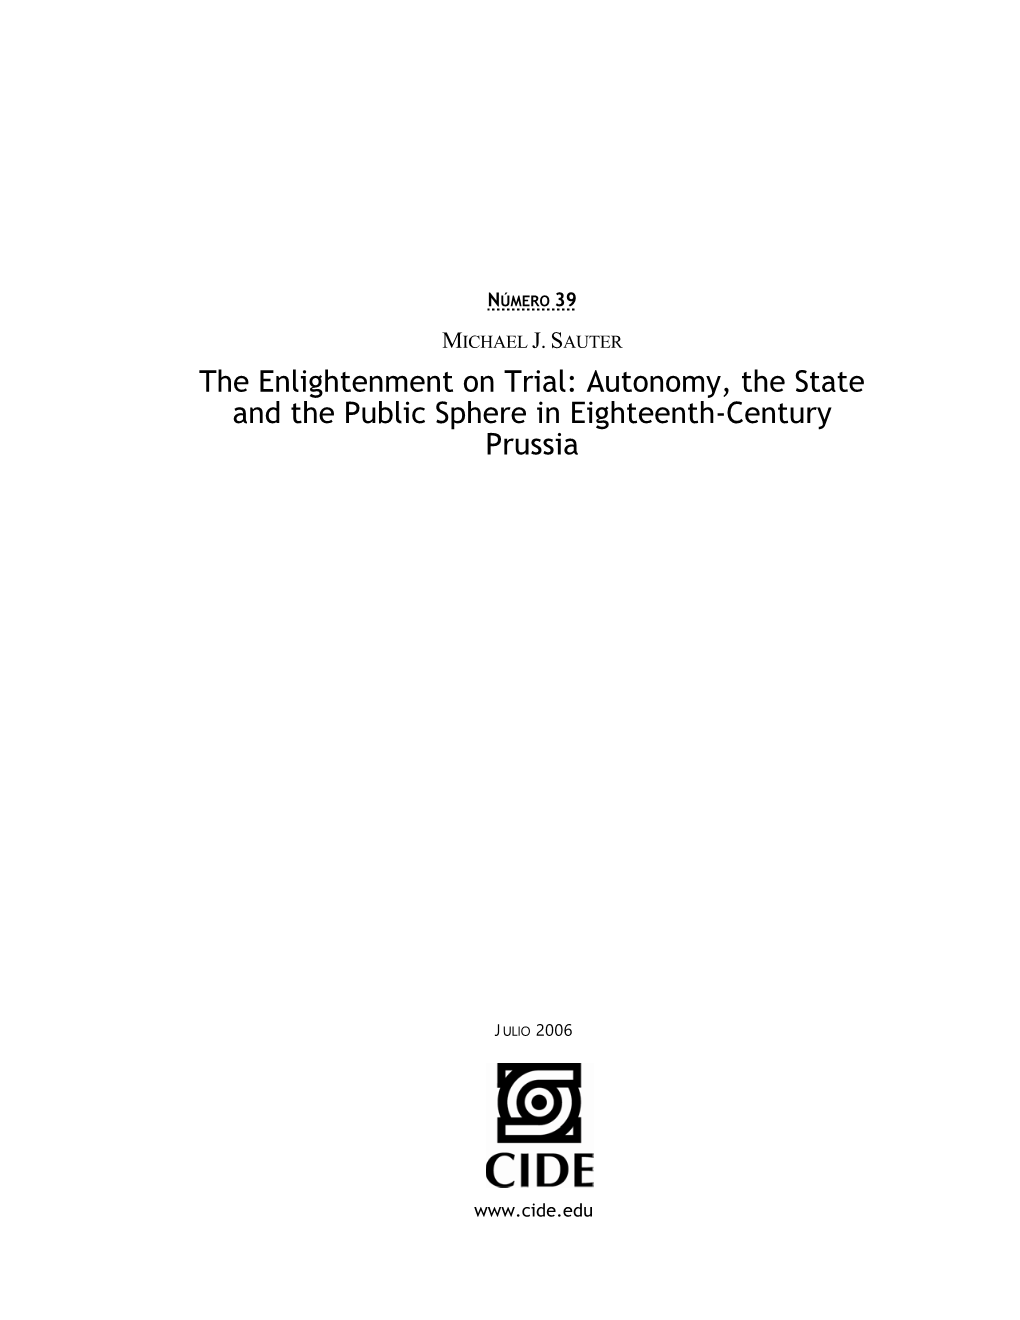 The Enlightenment on Trial: Autonomy, the State and the Public Sphere in Eighteenth-Century Prussia